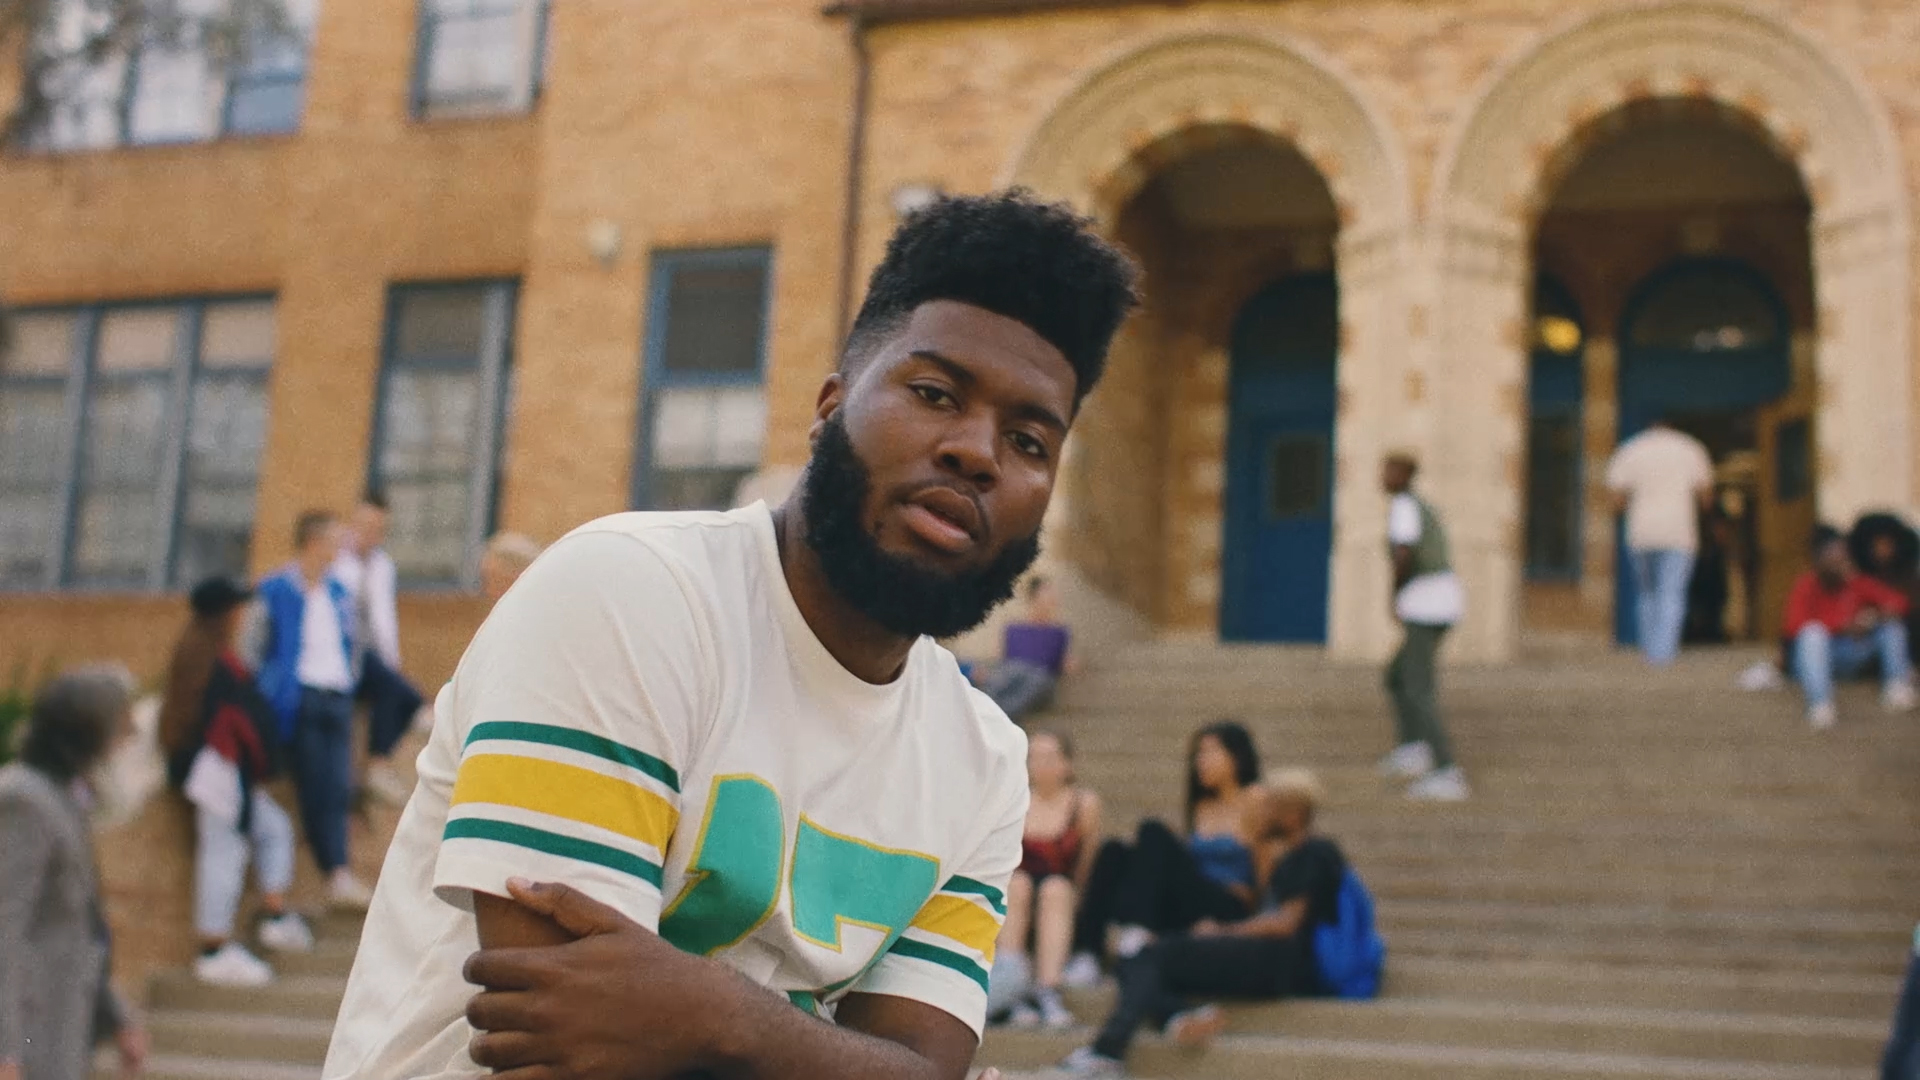 Khalid Releases Music Video for "Young Dumb & Broke" Today - RCA Records